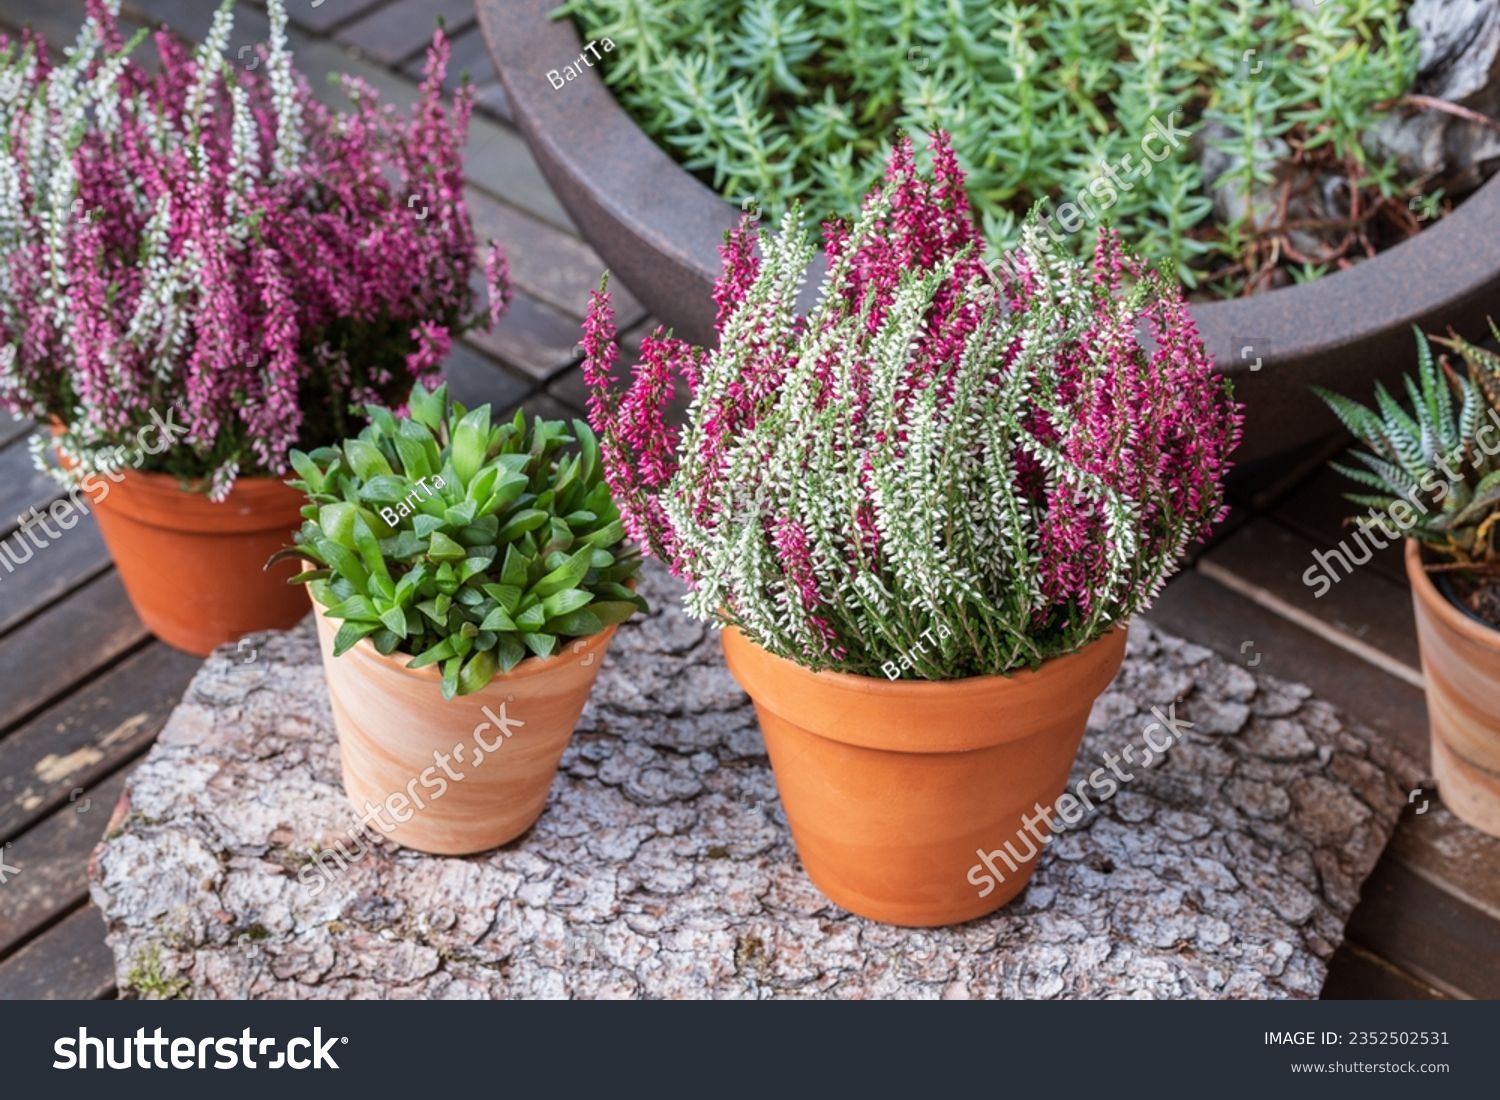 Blooming white and pink heather flowers (calluna vulgaris L.) in clay pot on wooden terrace floor in garden. Autumn and winter plants cultivating. #2352502531